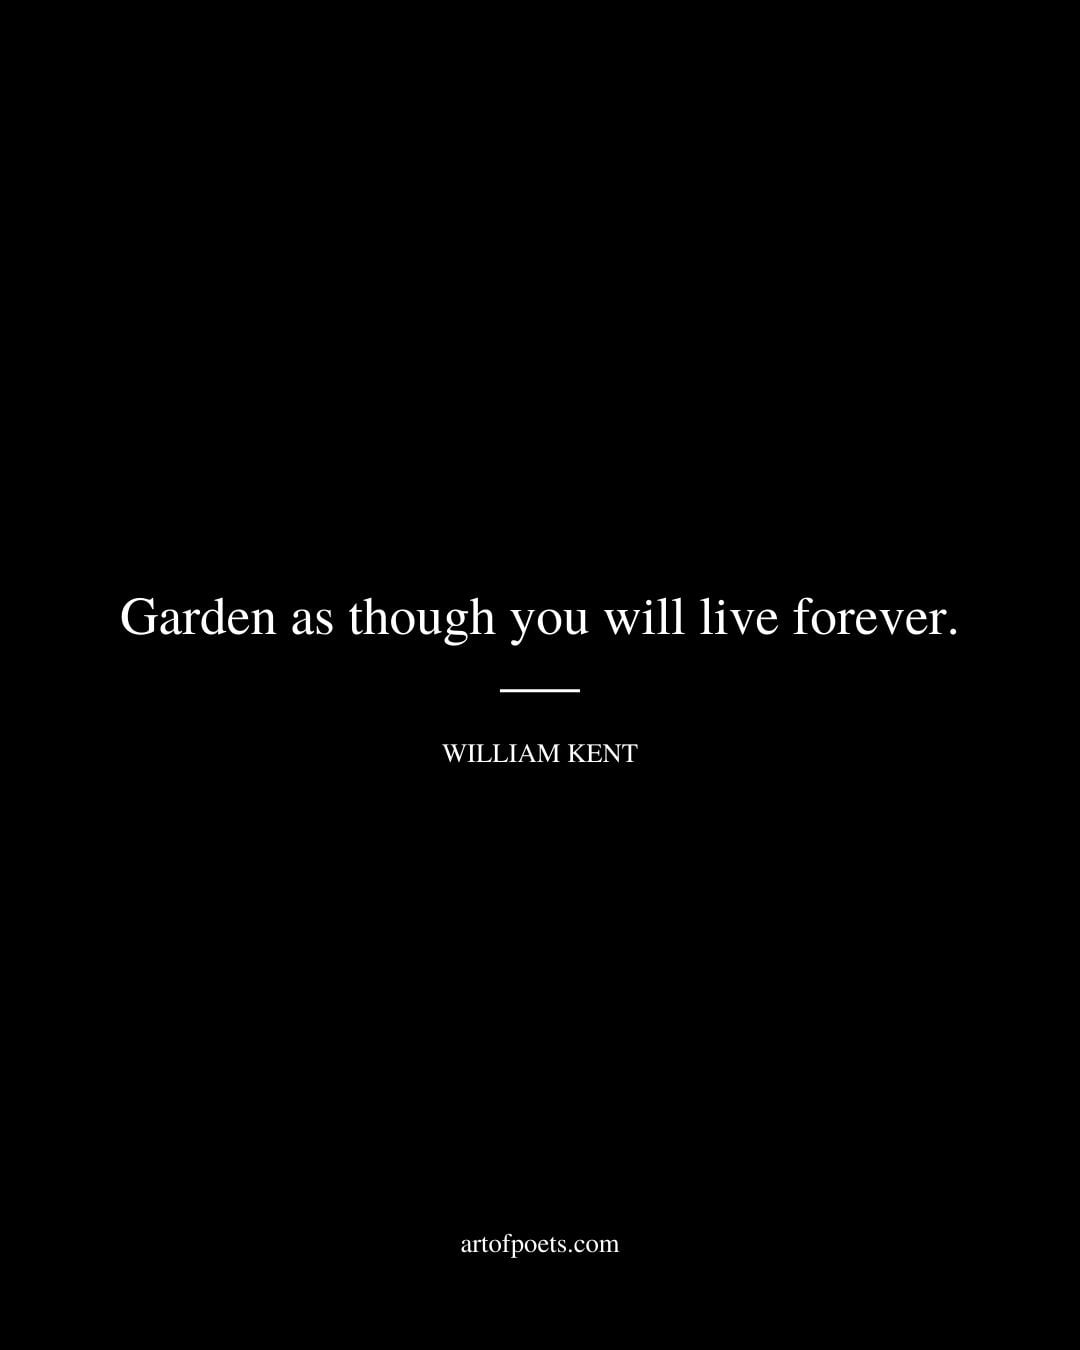 Garden as though you will live forever. William Kent